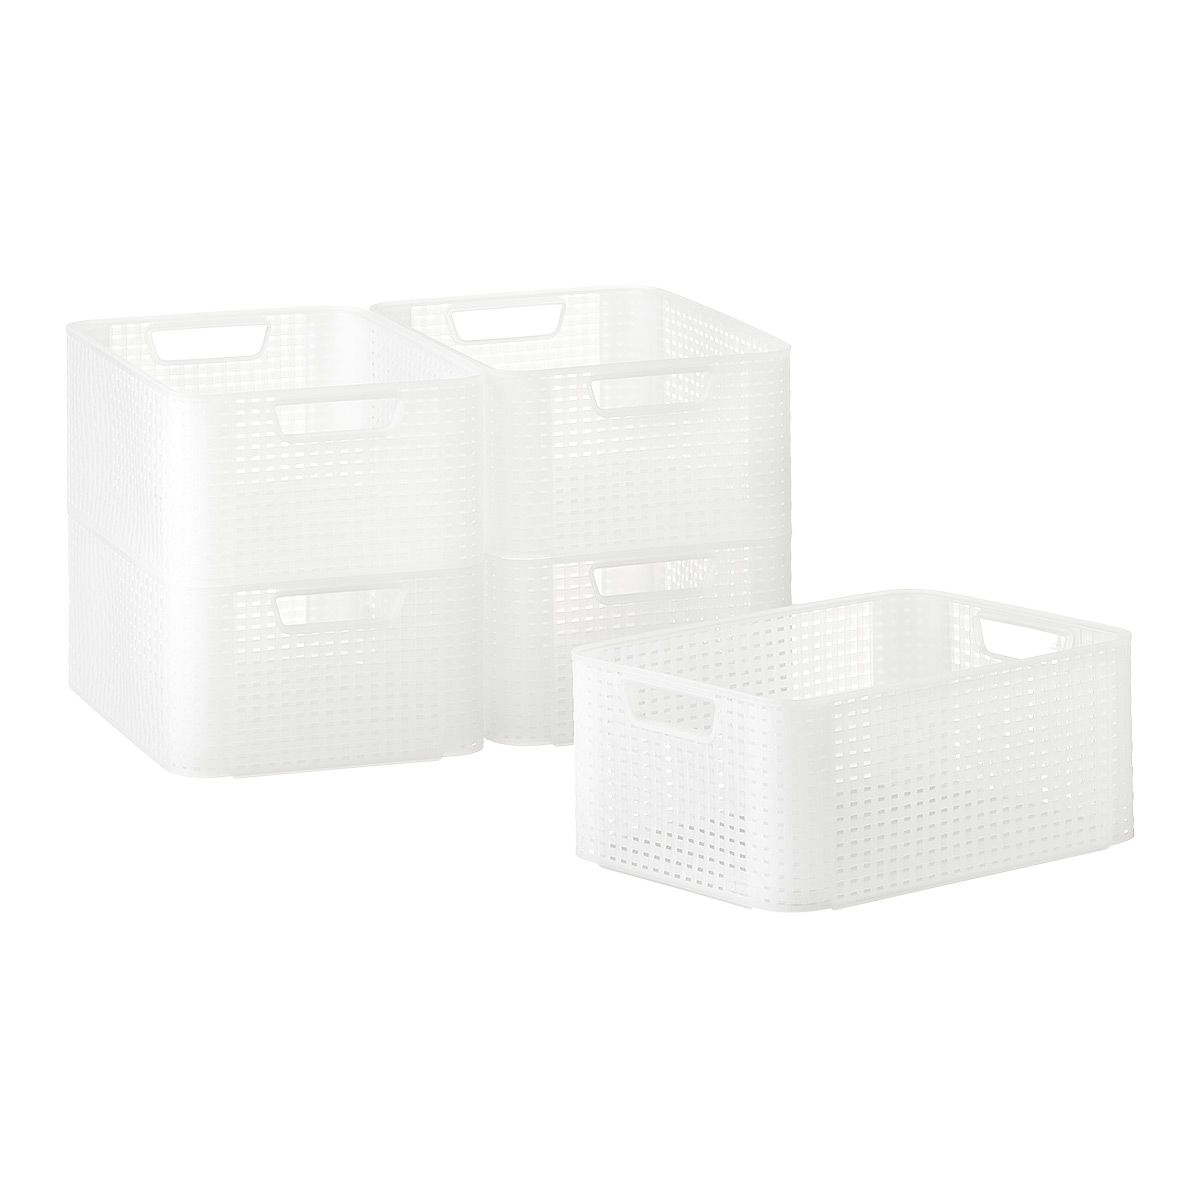 Curver Translucent Basketweave Storage Bin with Handles | The Container Store